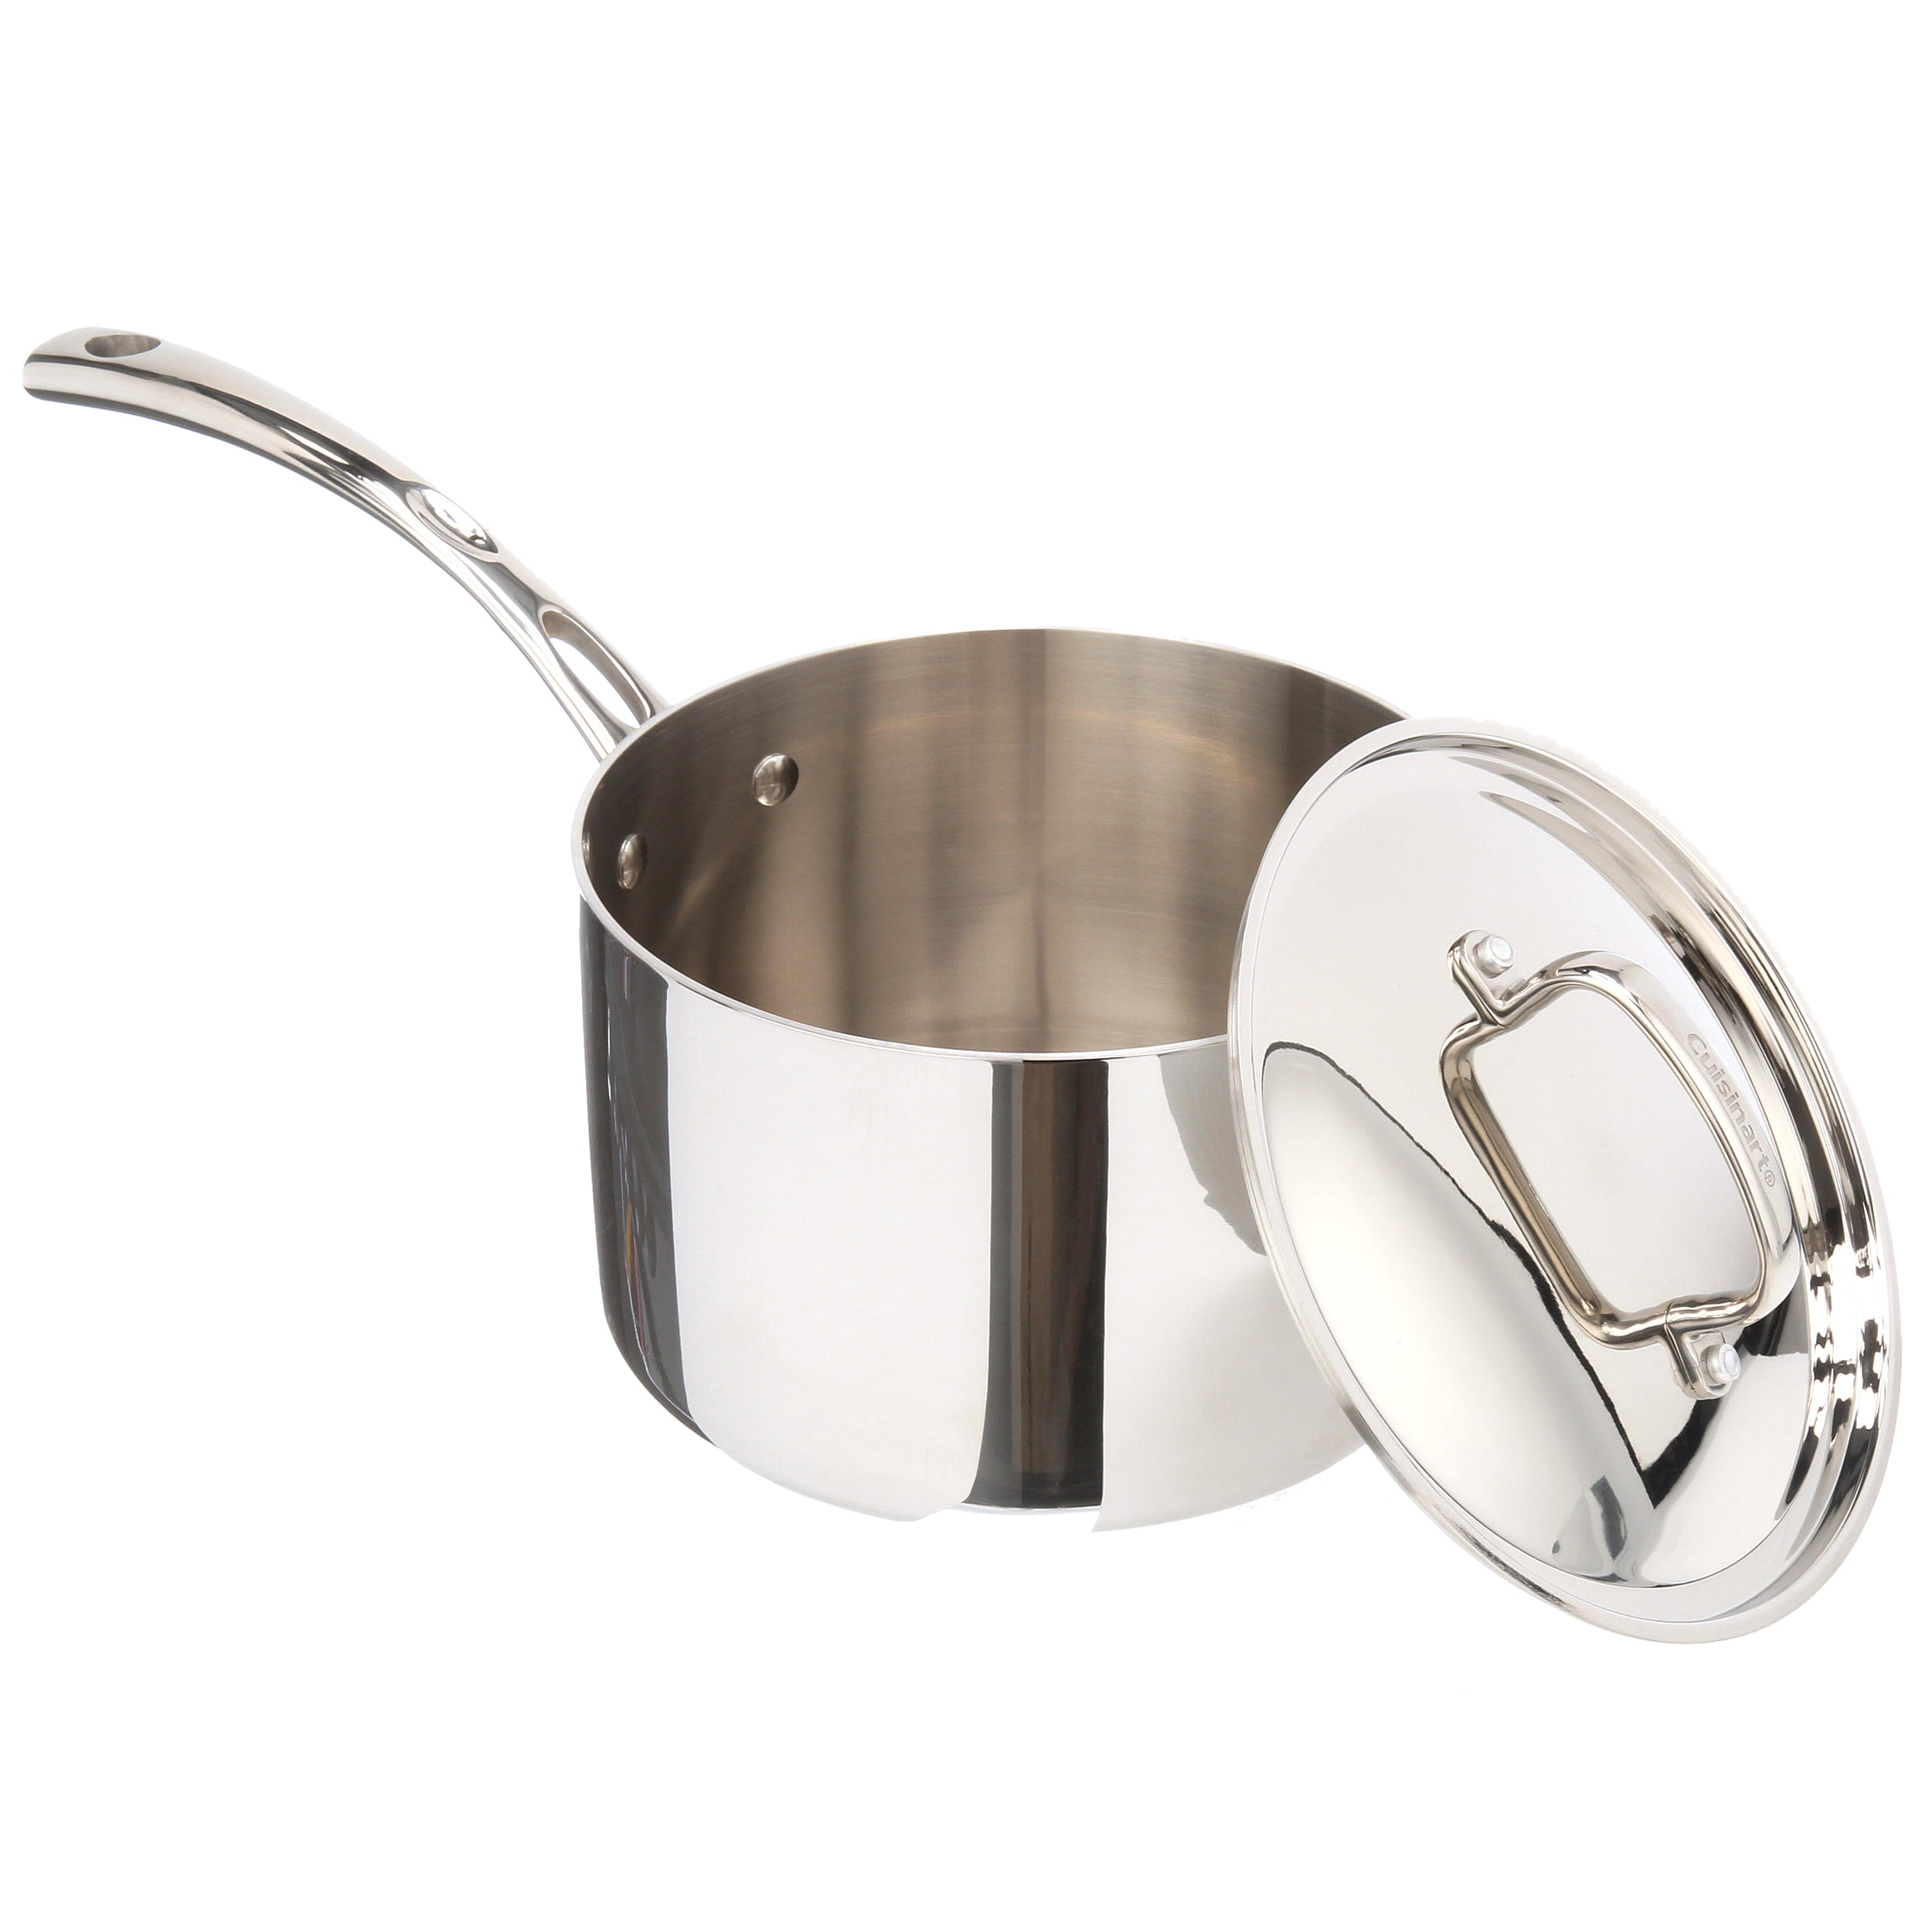  Cuisinart French Classic Tri-Ply Stainless 6-Quart Stockpot  with Cover & 1.5 Quart Multiclad Pro Triple Ply Saucepan w/Cover,  MCP19-16N: Home & Kitchen